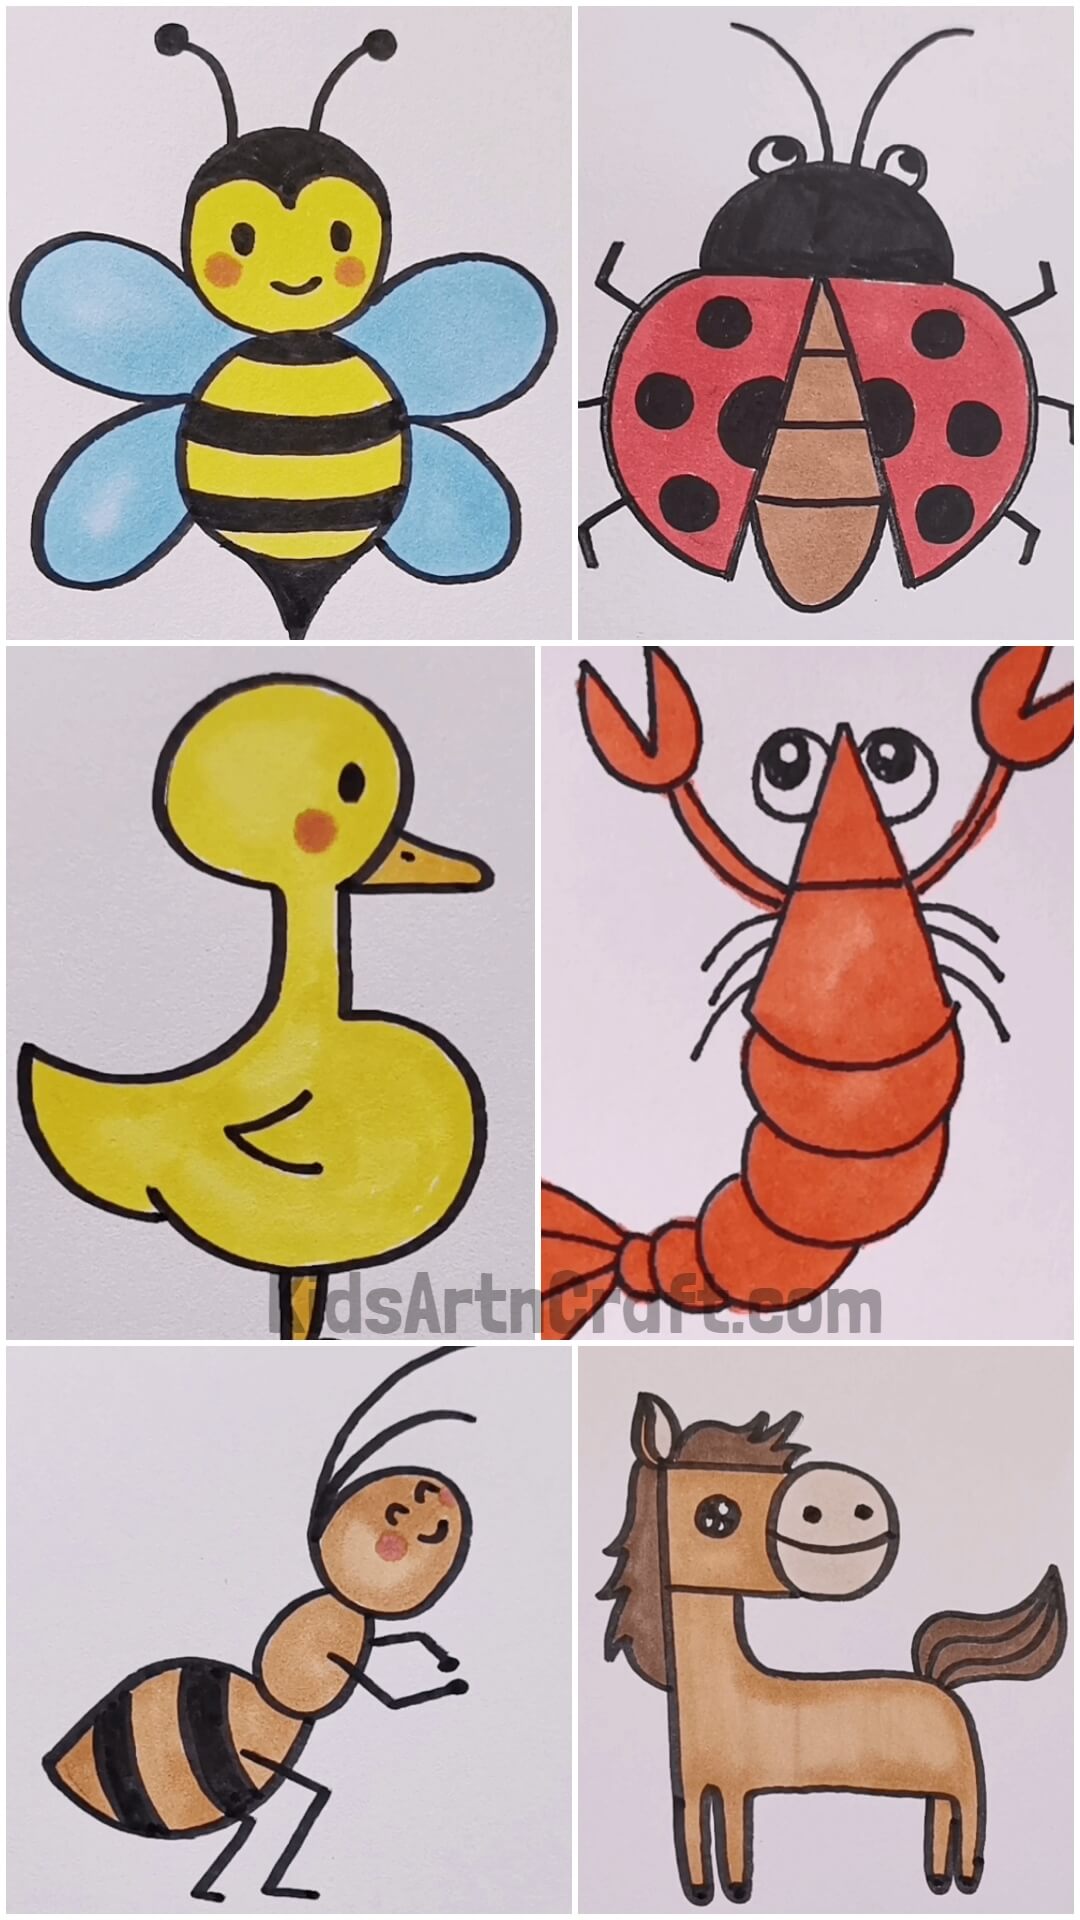 Easy Animal Drawings & Coloring for Kids